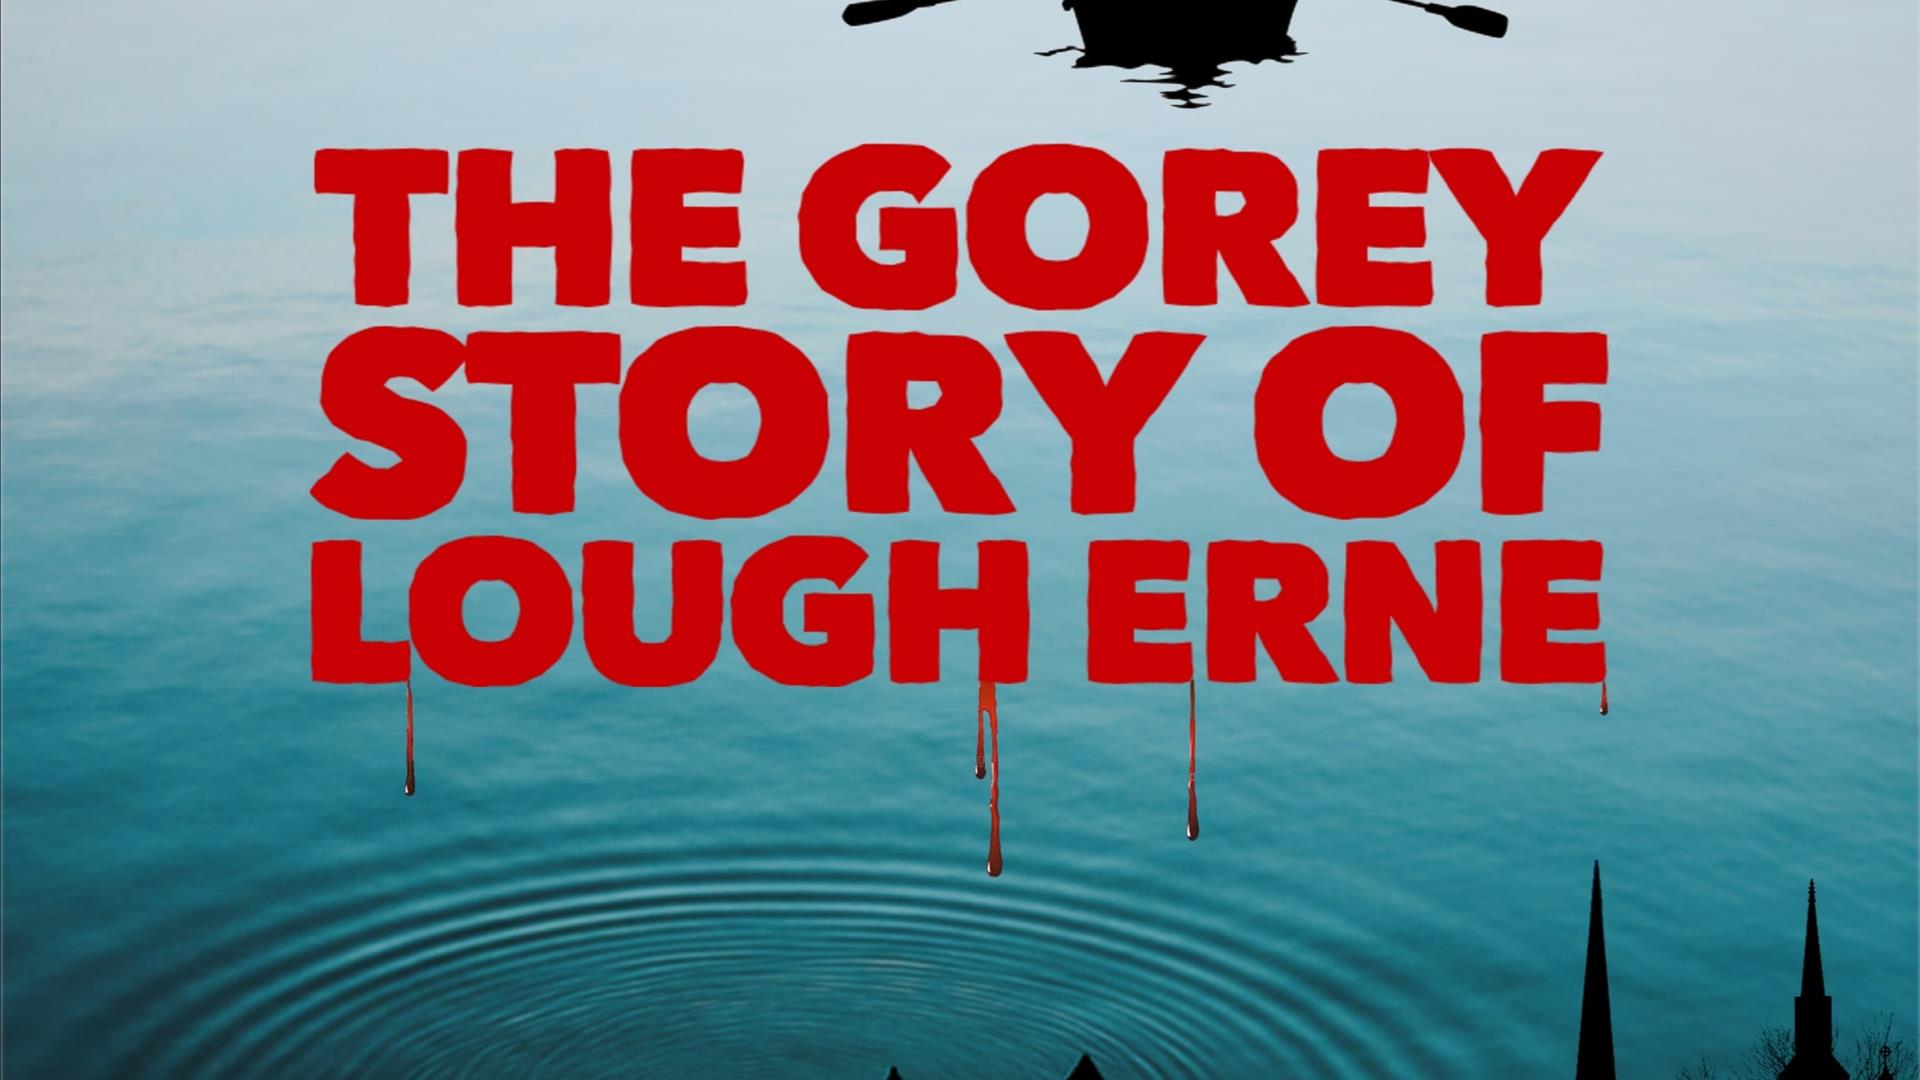 The Gorey Story of Lough Erne